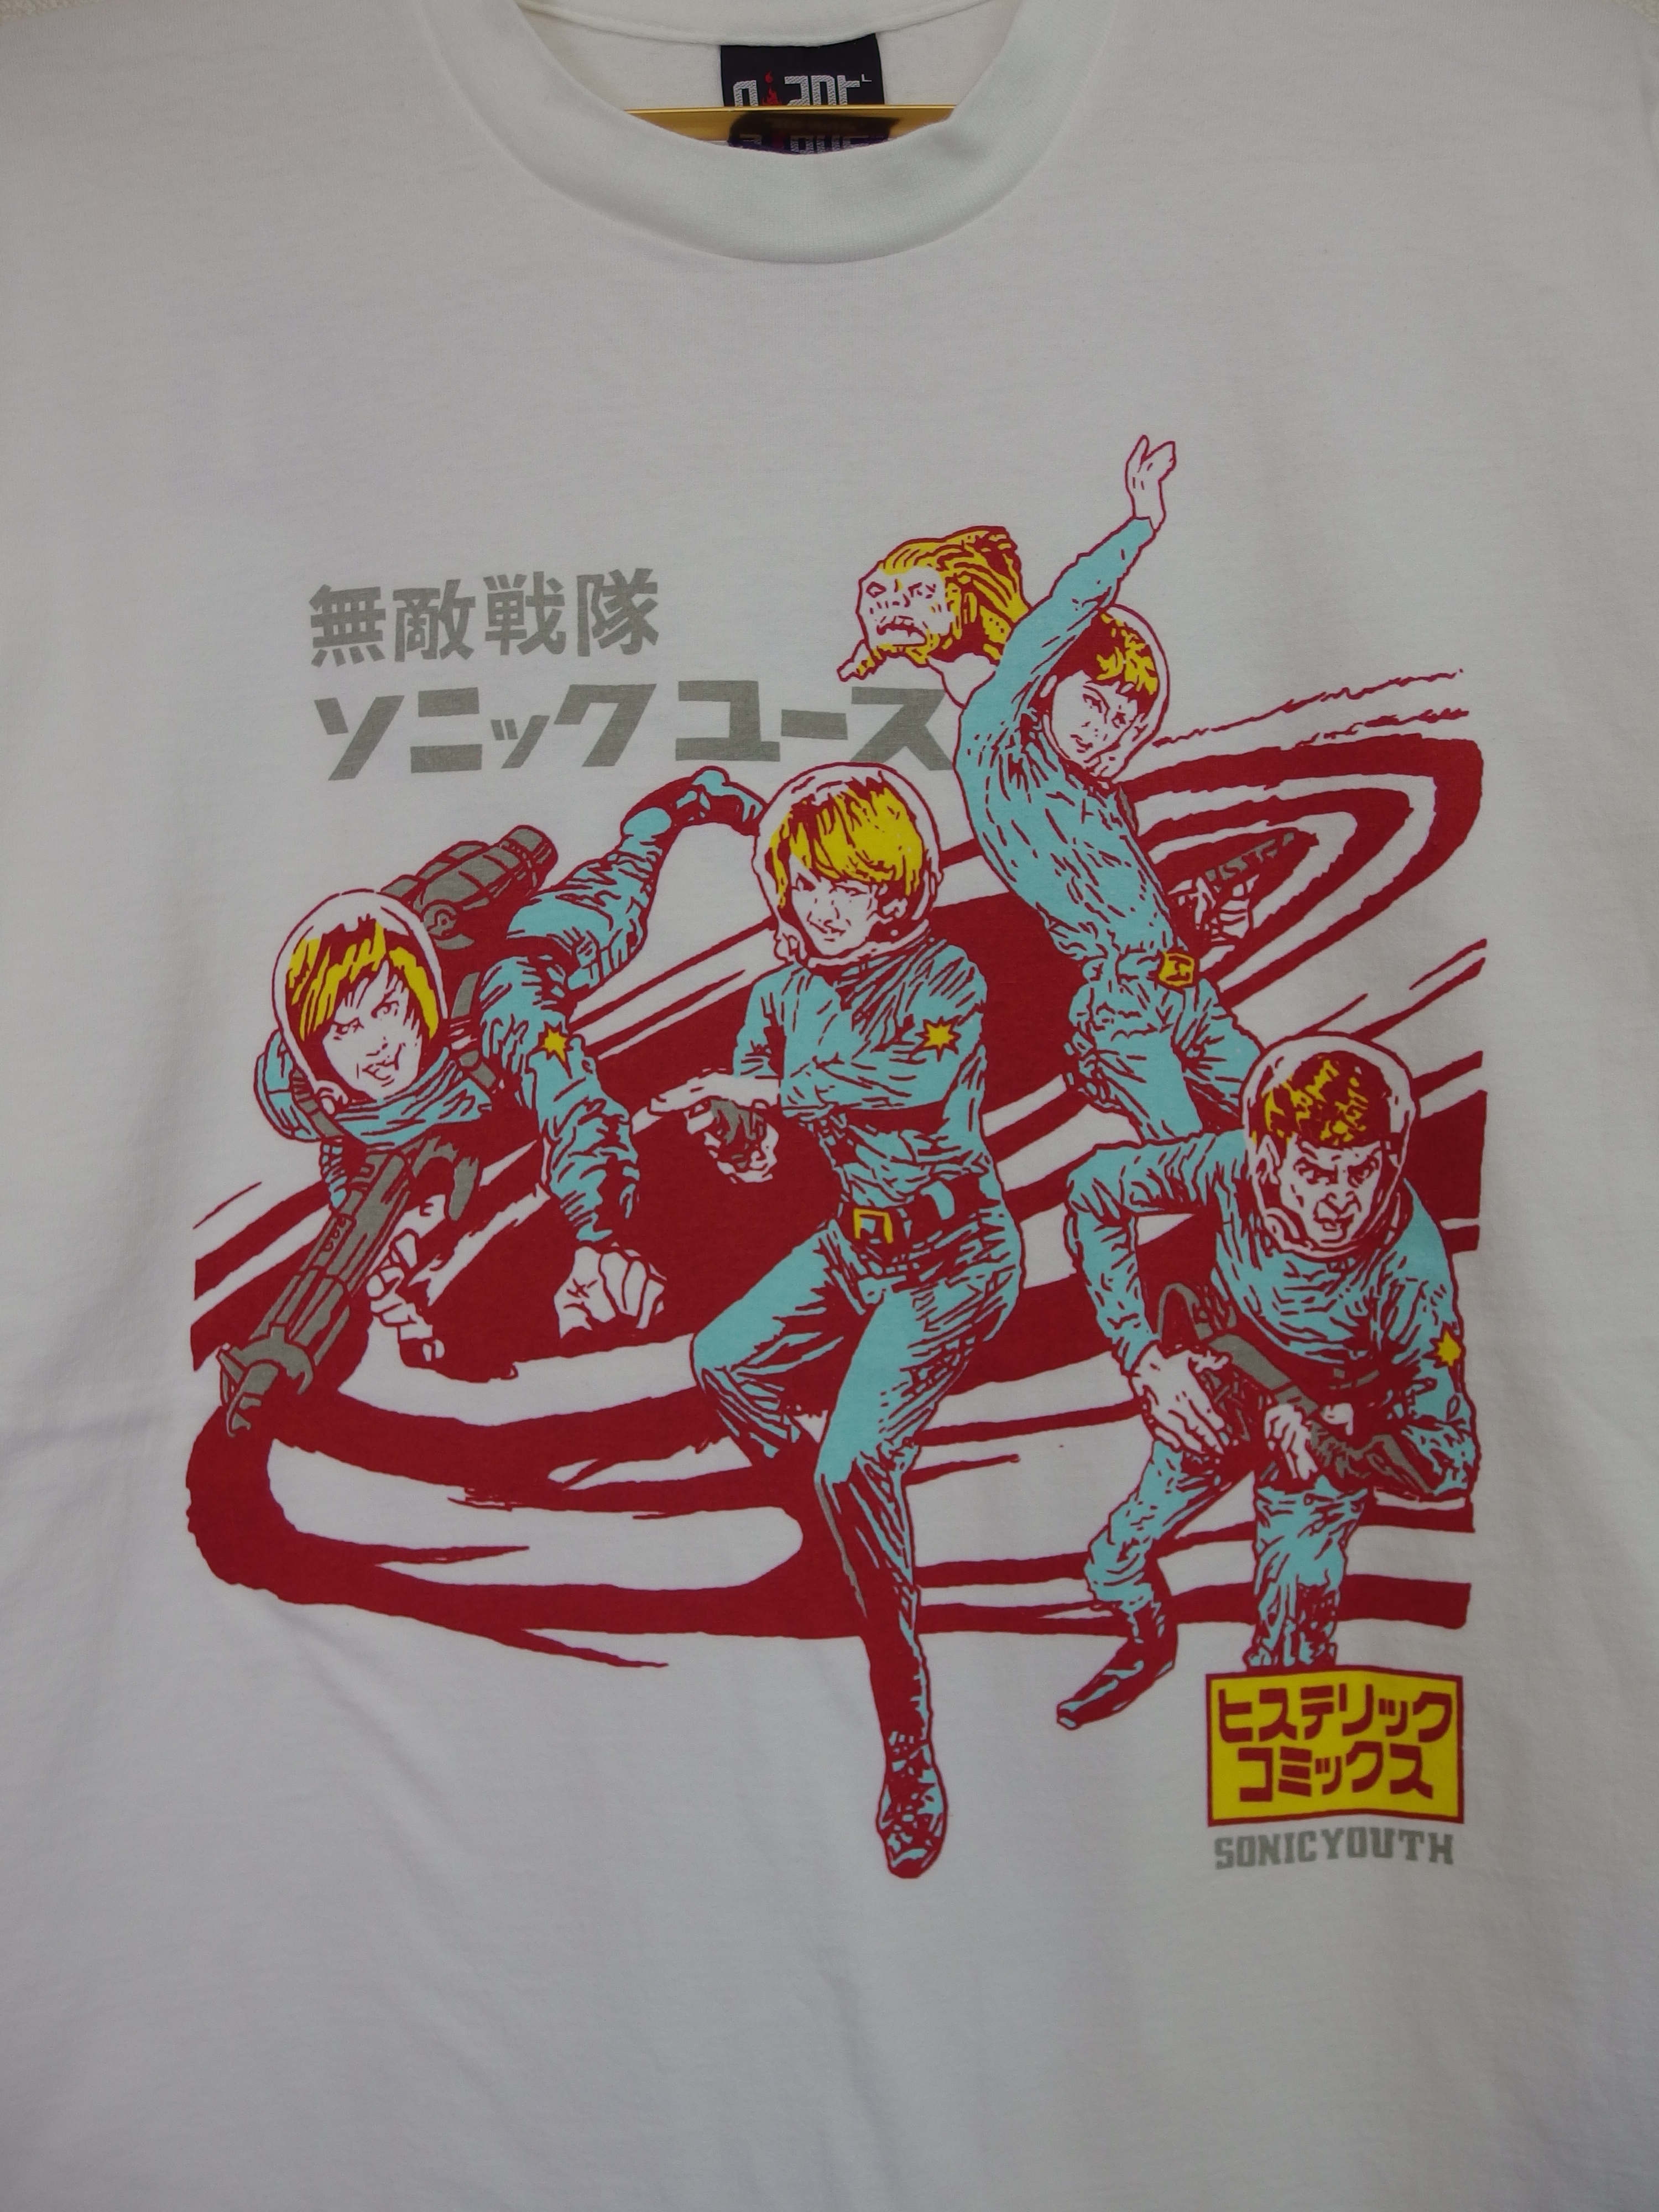 53 SONIC YOUTH ソニックユース 無敵戦隊 Tシャツ アメリカ製 USA 